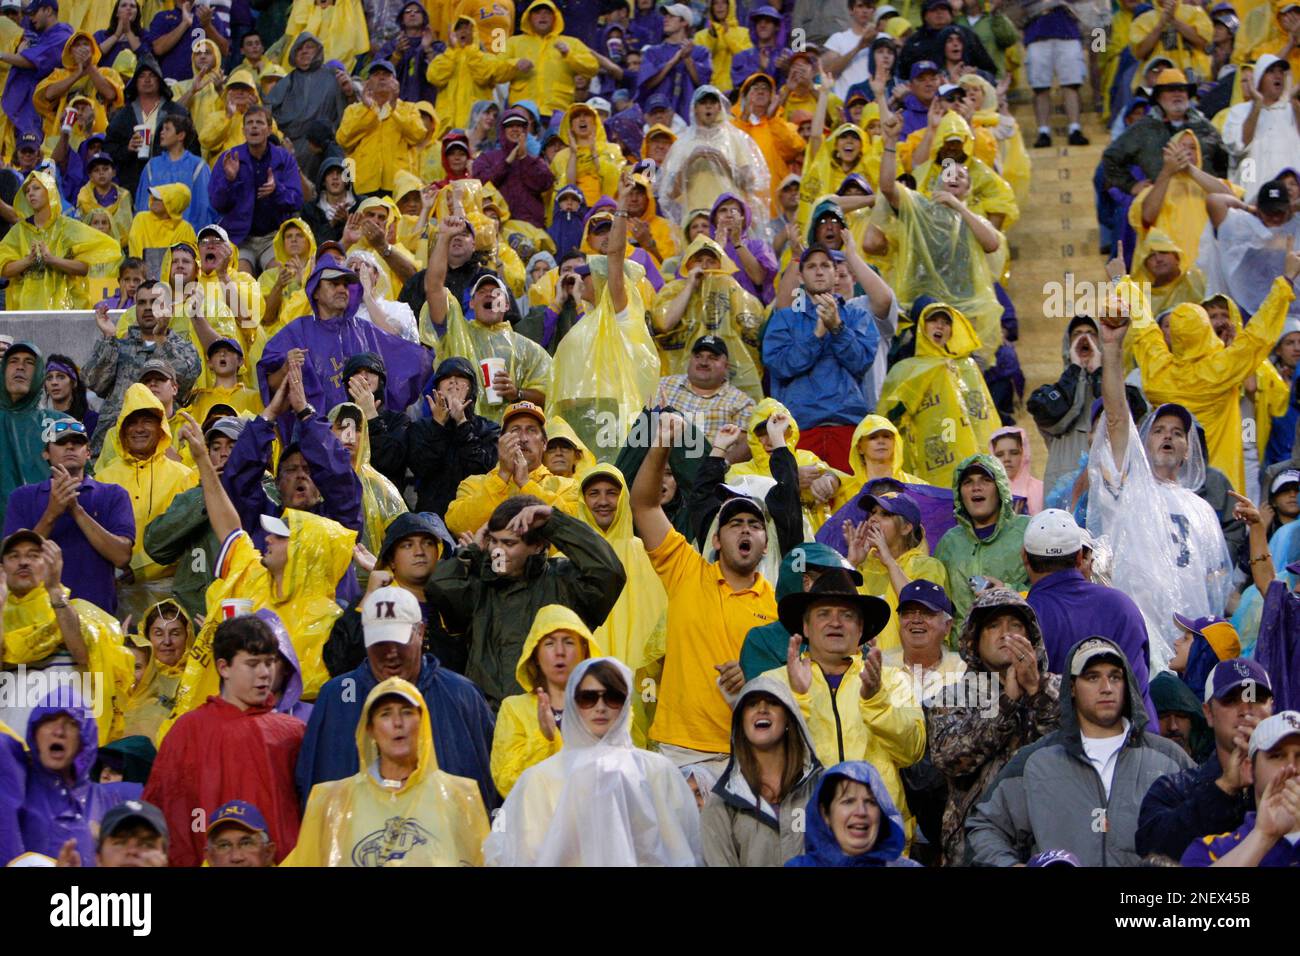 Tiger Stadium fans wearing rain gear cheer their team on during the LSU-t  Vanderbilt game in the first half of an NCAA college football game in Baton  Rouge, La., Saturday, Sept. 12,